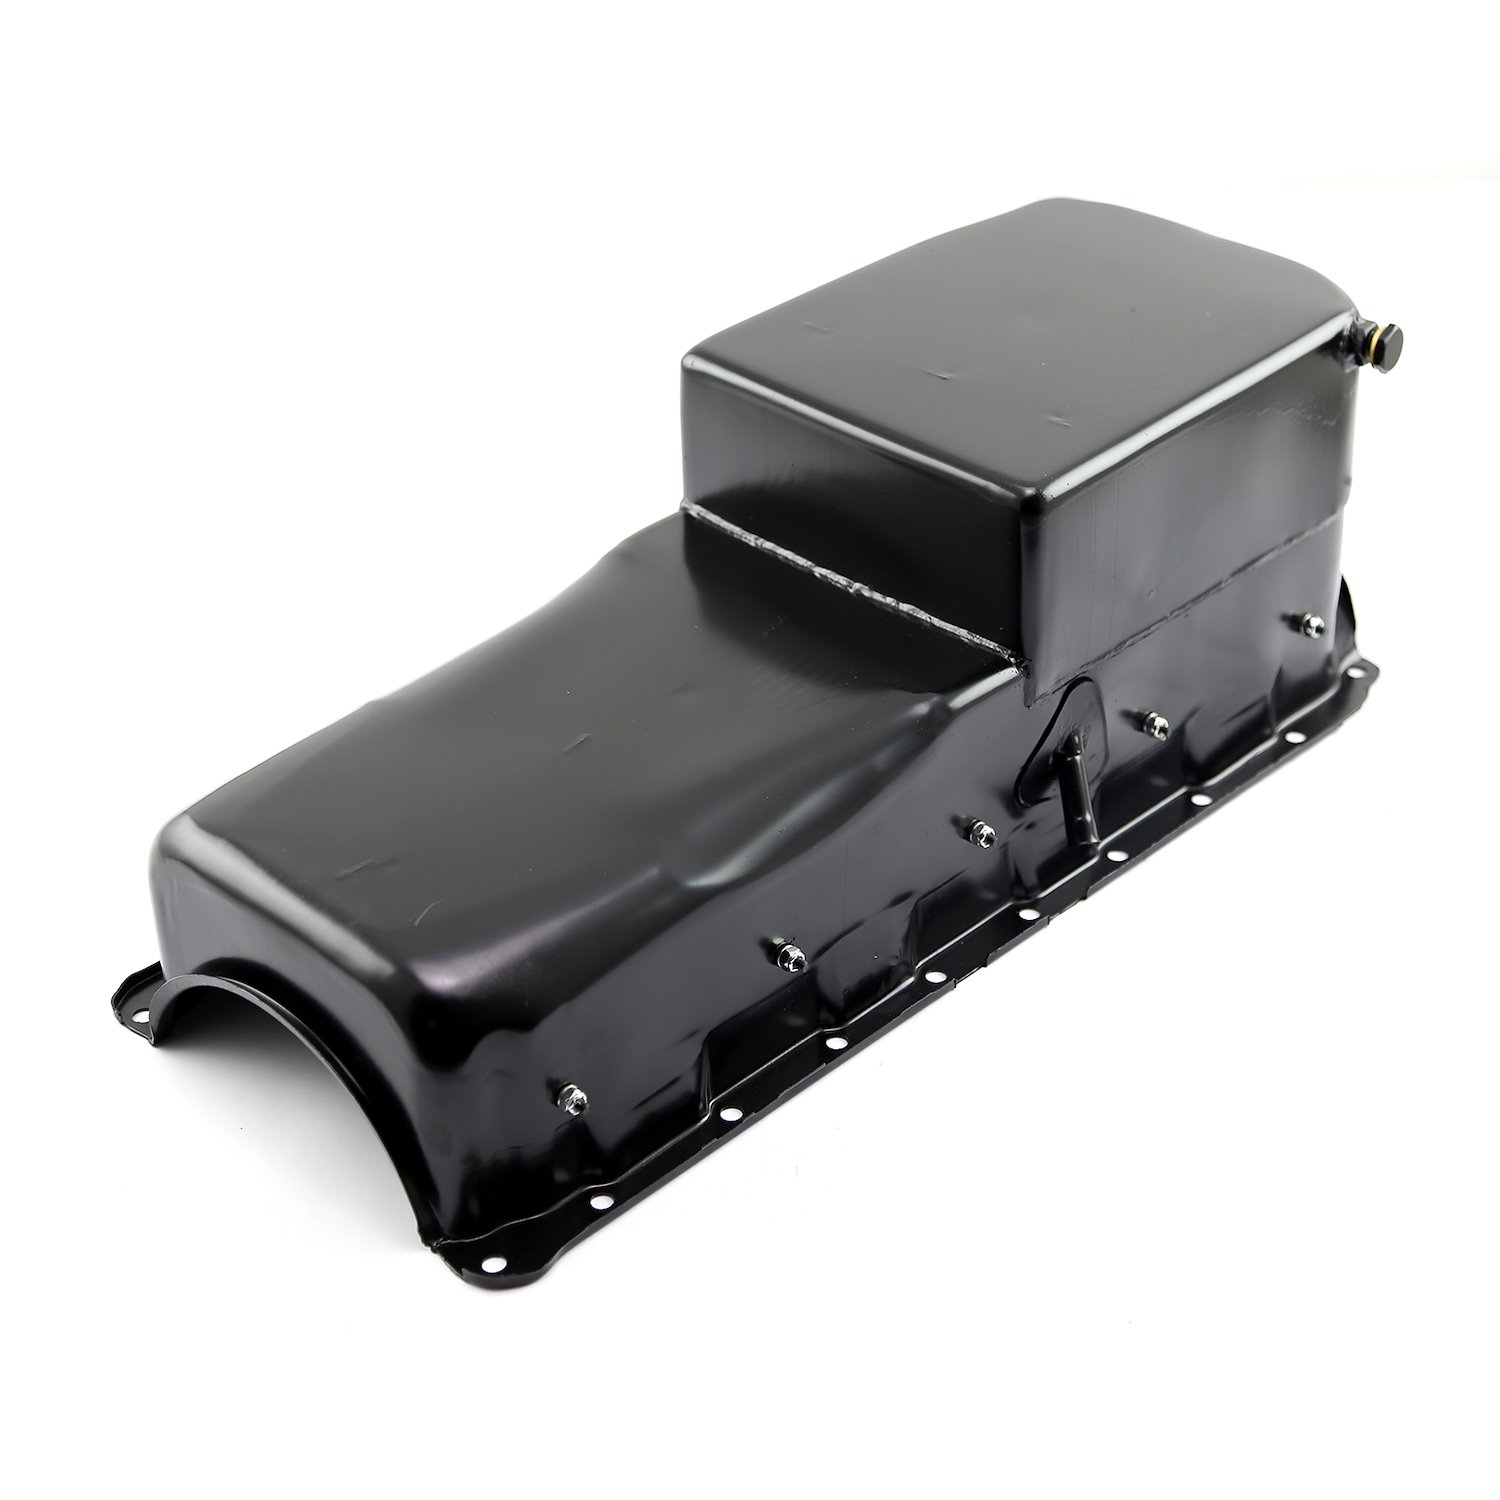 Black Drag Oil Pan with Bolt On Windage Tray Big Block Chevy Gen 4